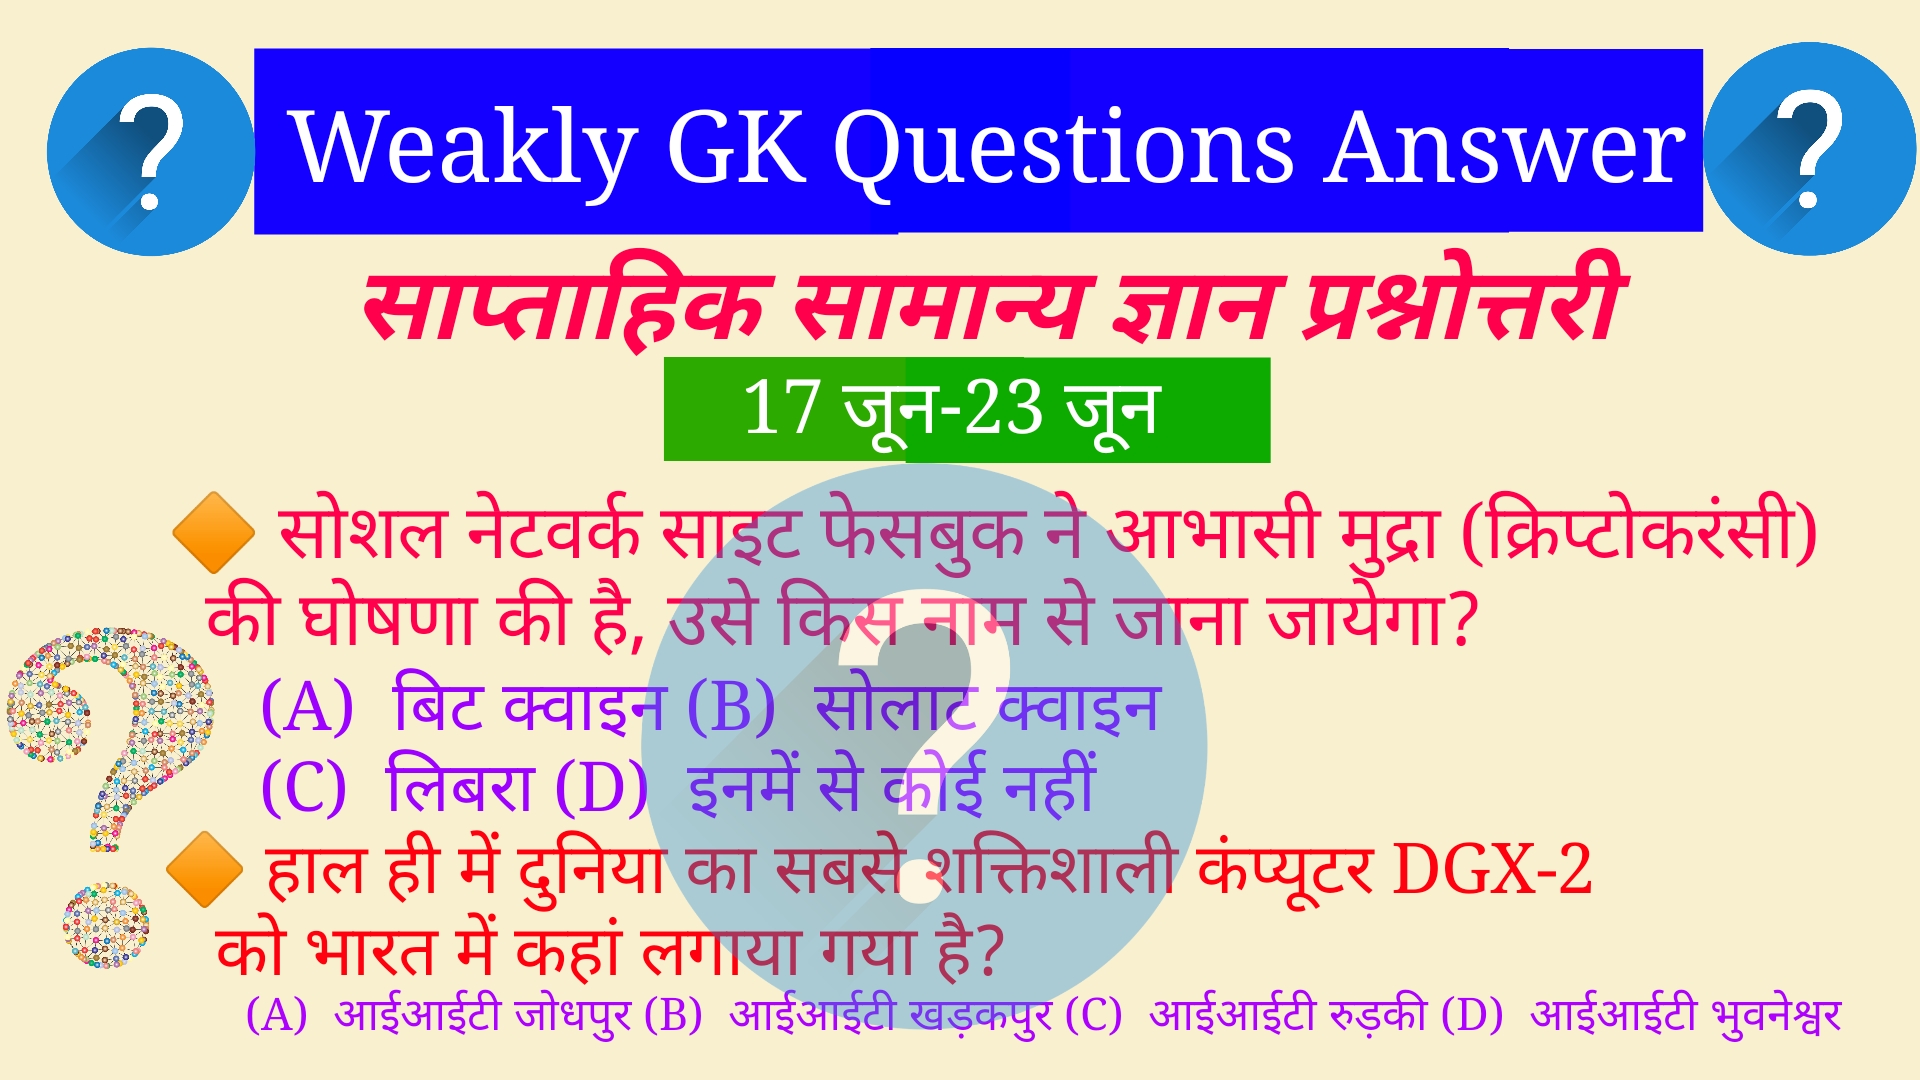 Weakly GK questions answer June